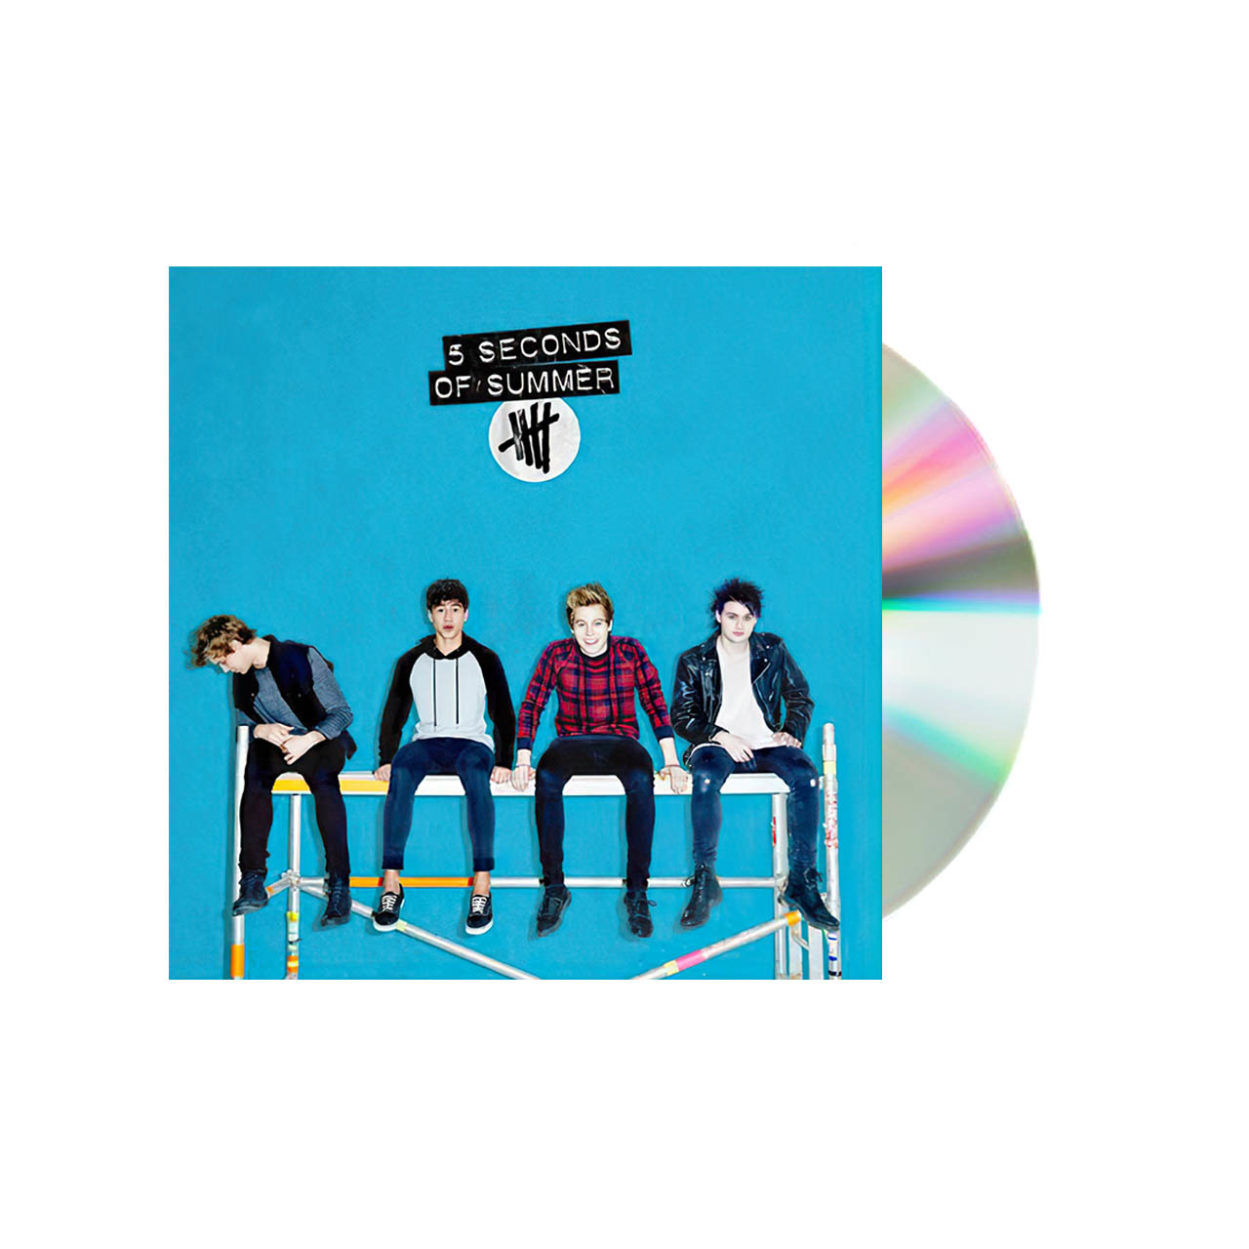 5 Seconds of summer self titled blue cd